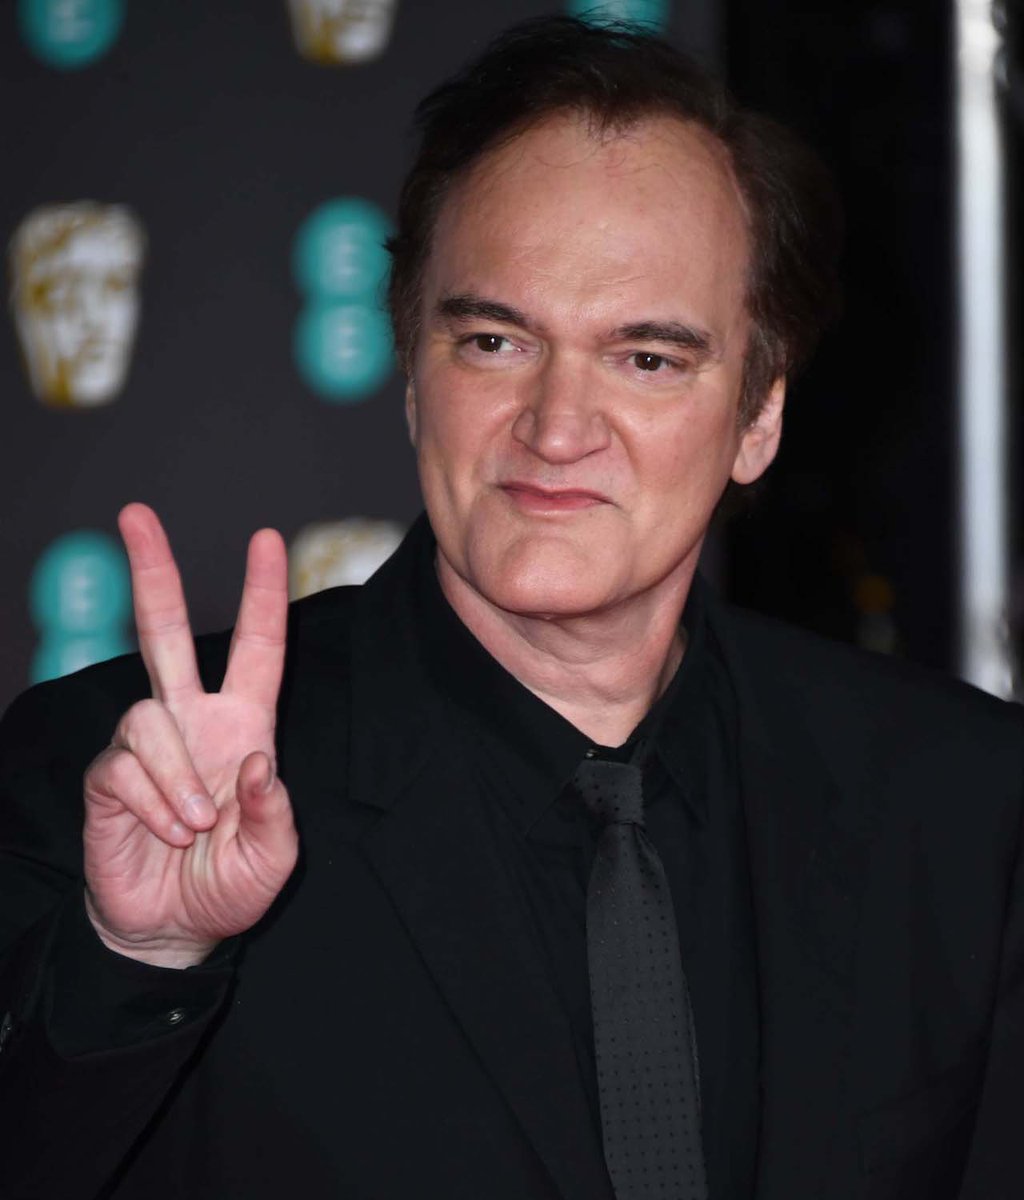 Quentin Tarantino has scrapped his much anticipated 10th film THE MOVIE CRITIC and is “back at the drawing board” (via @krolljvar)